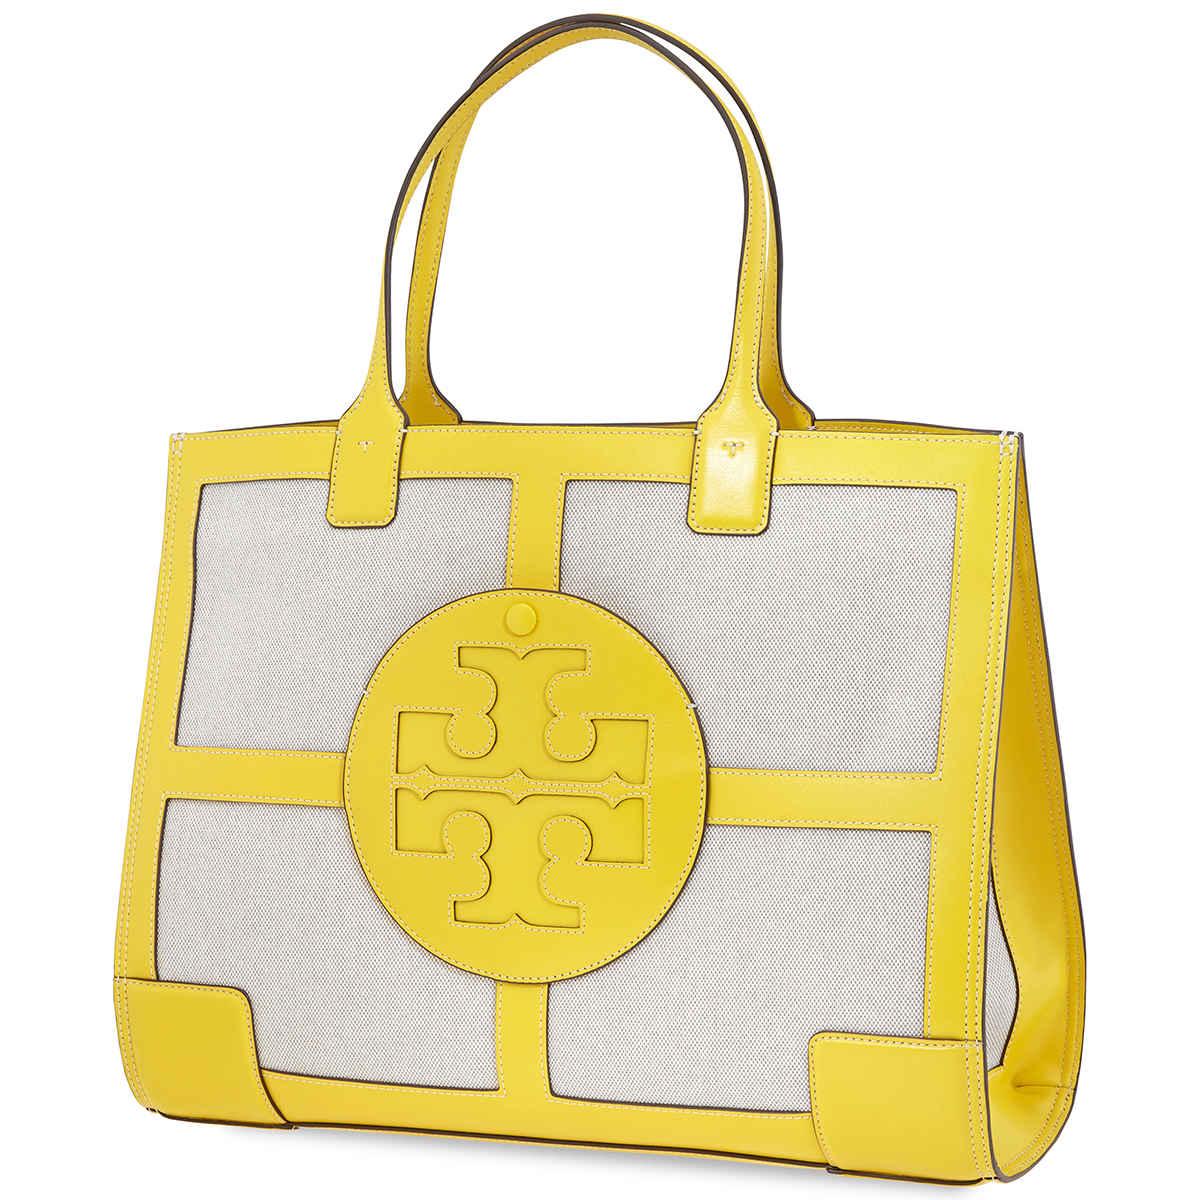 Tory Burch ,Canvas Basketweave Tote, yellow￼